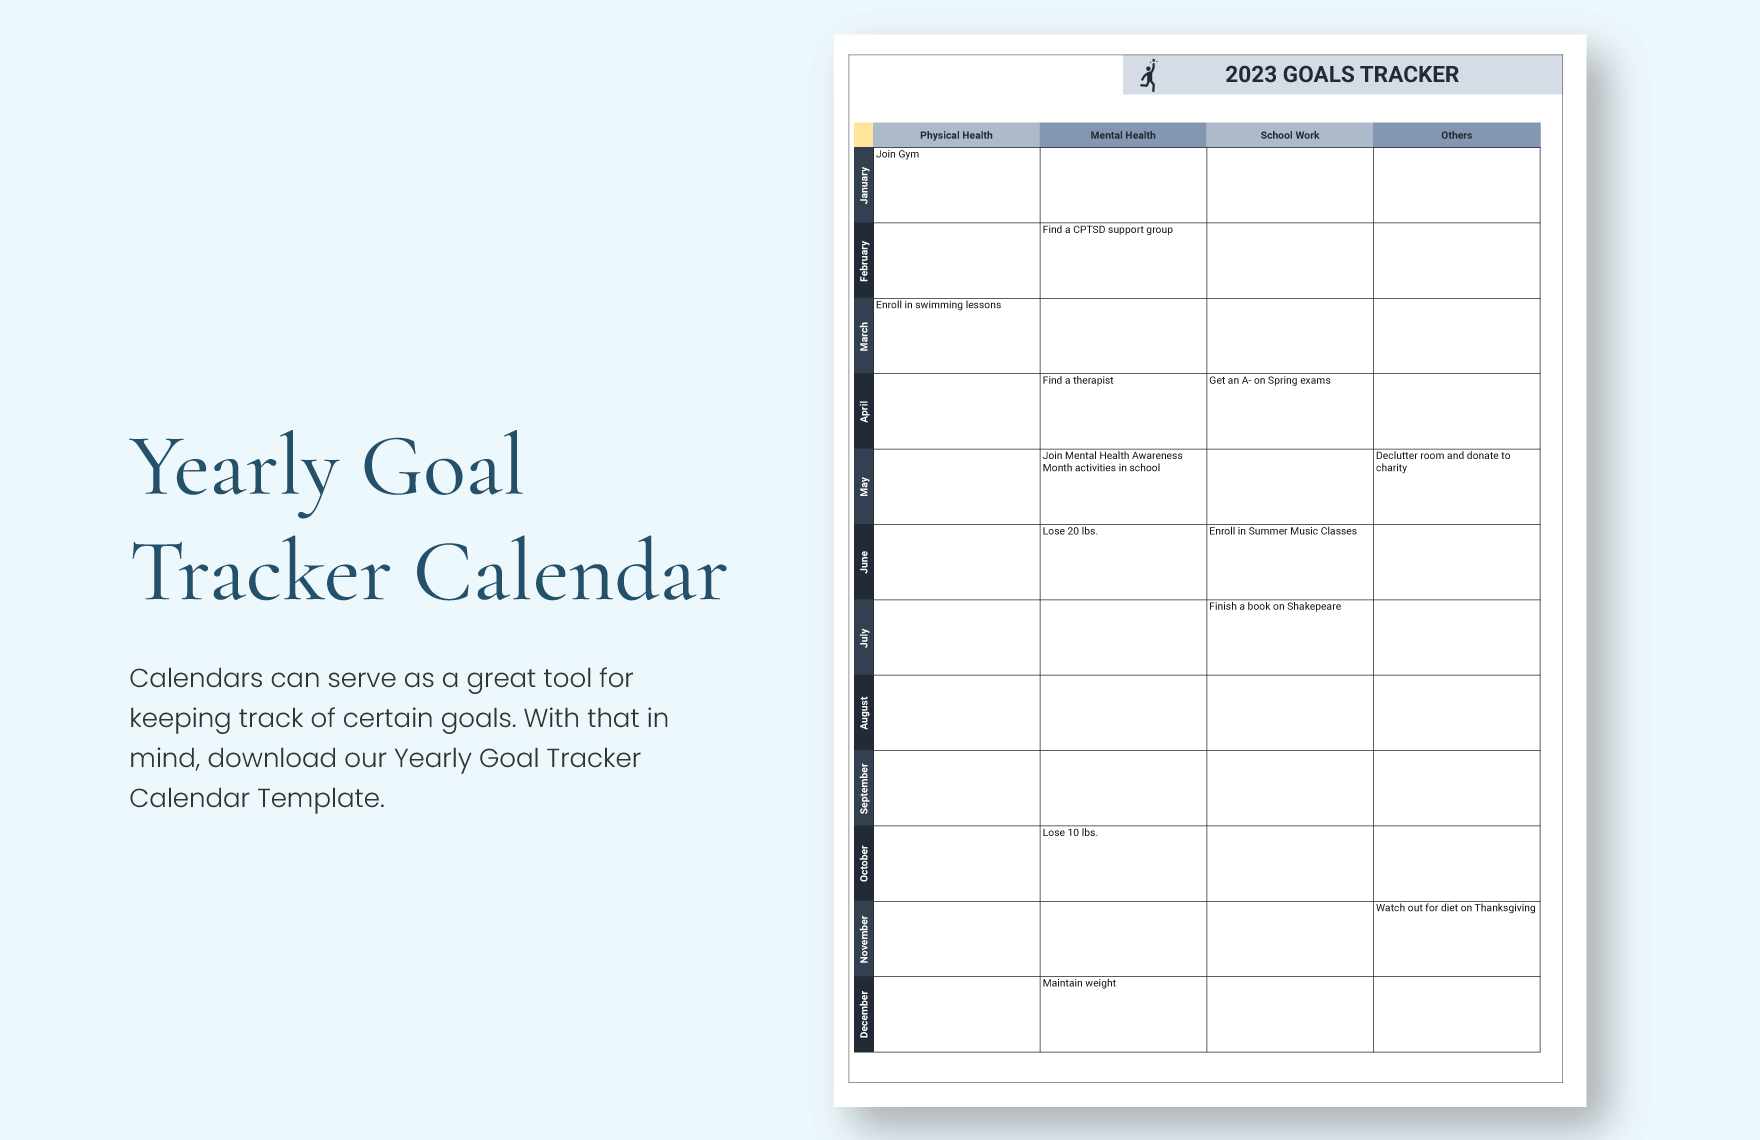 Yearly Goal Tracker Calendar Google Sheets, Excel